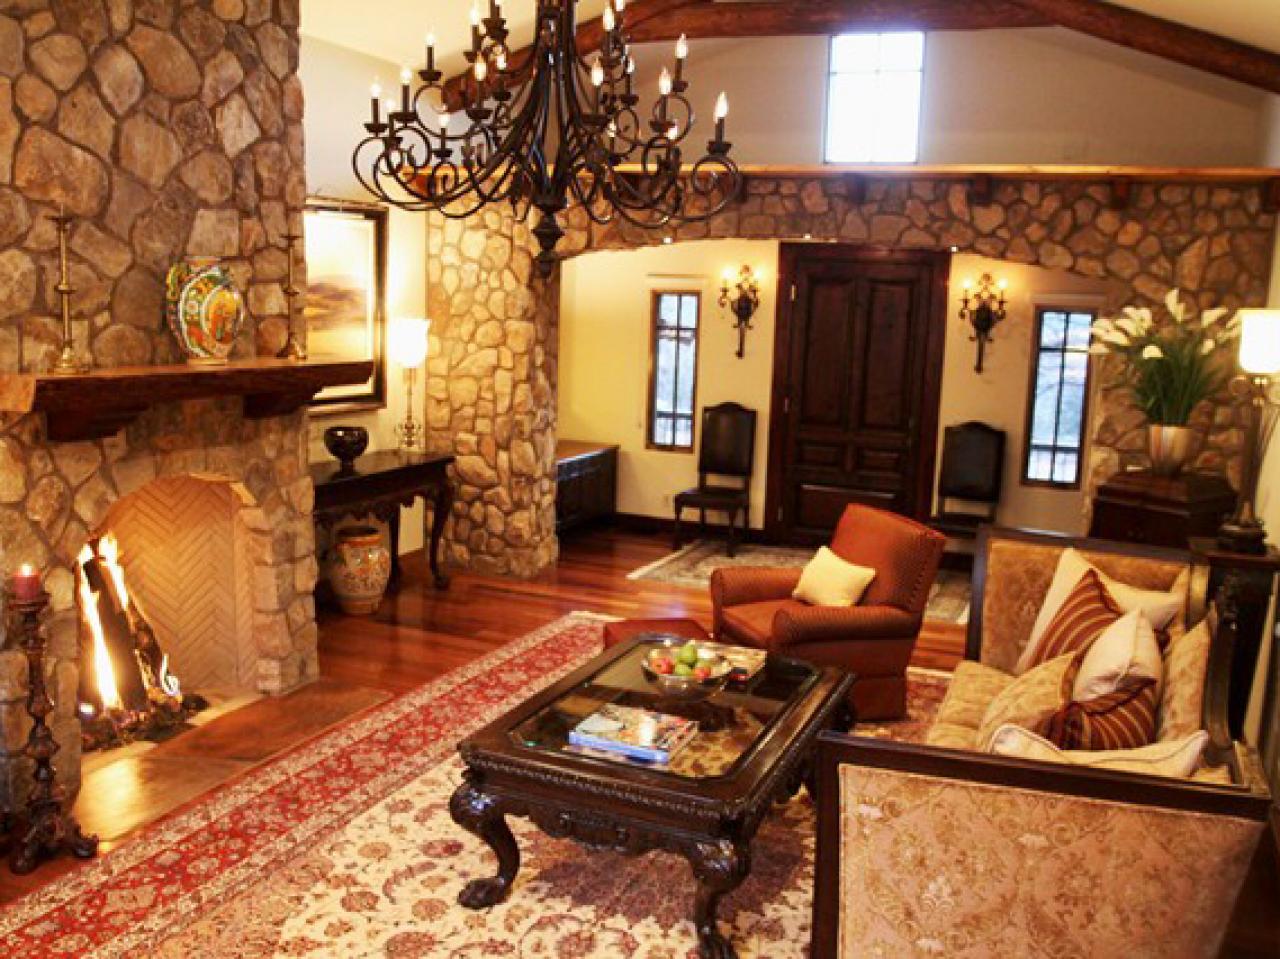 Rustic Living Room With Spanish Style | HGTV